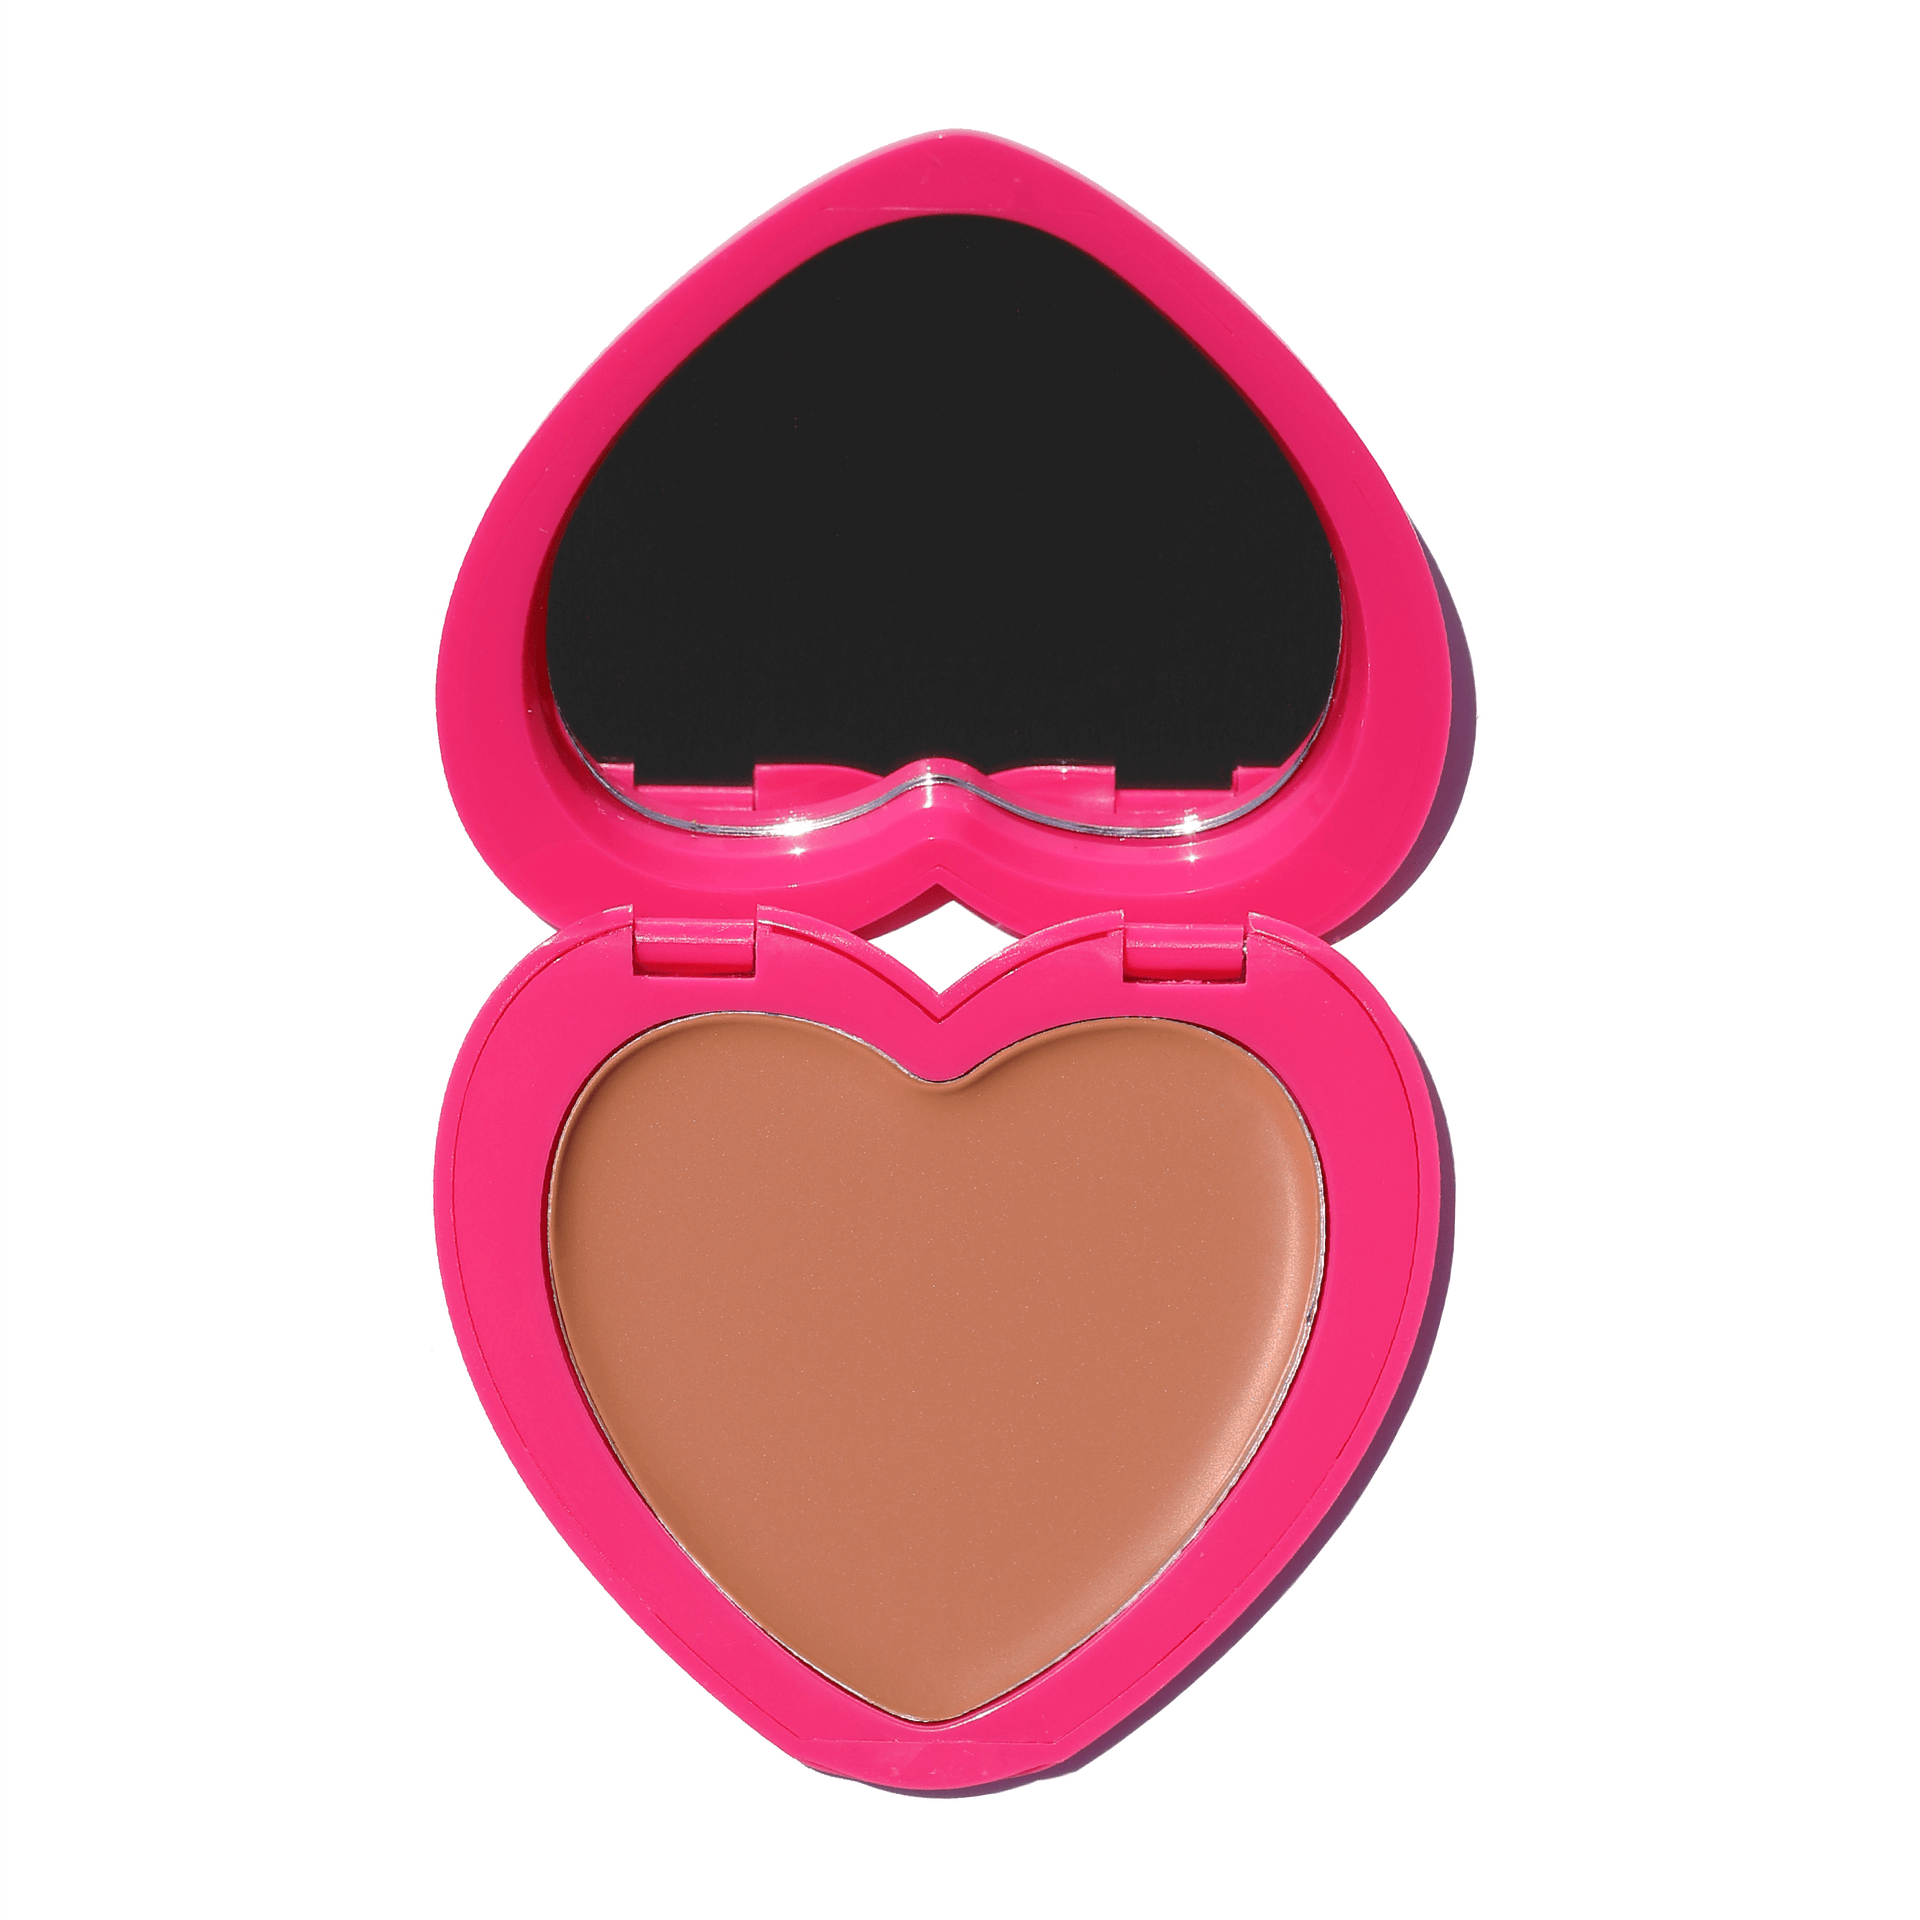 Heart-shaped Candy Paint Cheek + Lip Tint compact with mirror and radiant cream blush, perfect for creating a dewy, natural flush on cheeks, lips, and eyelids.